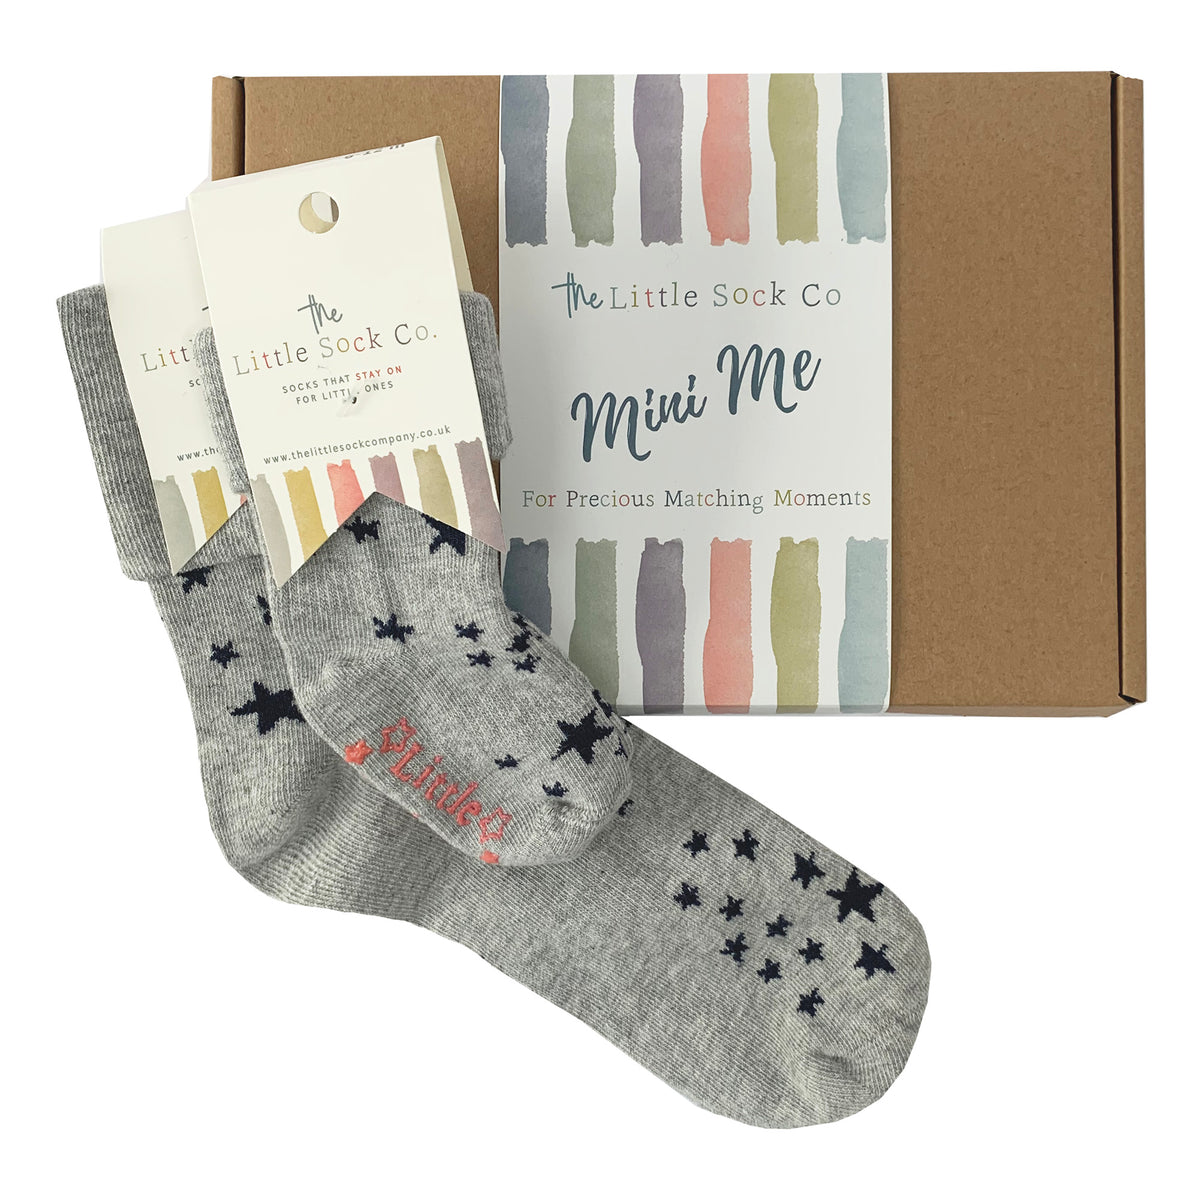 Mini Me Matching Adult and Child Family Socks Gift Set in Stars ⭐️ - The Perfect Gift for Birthdays or Mother's Day